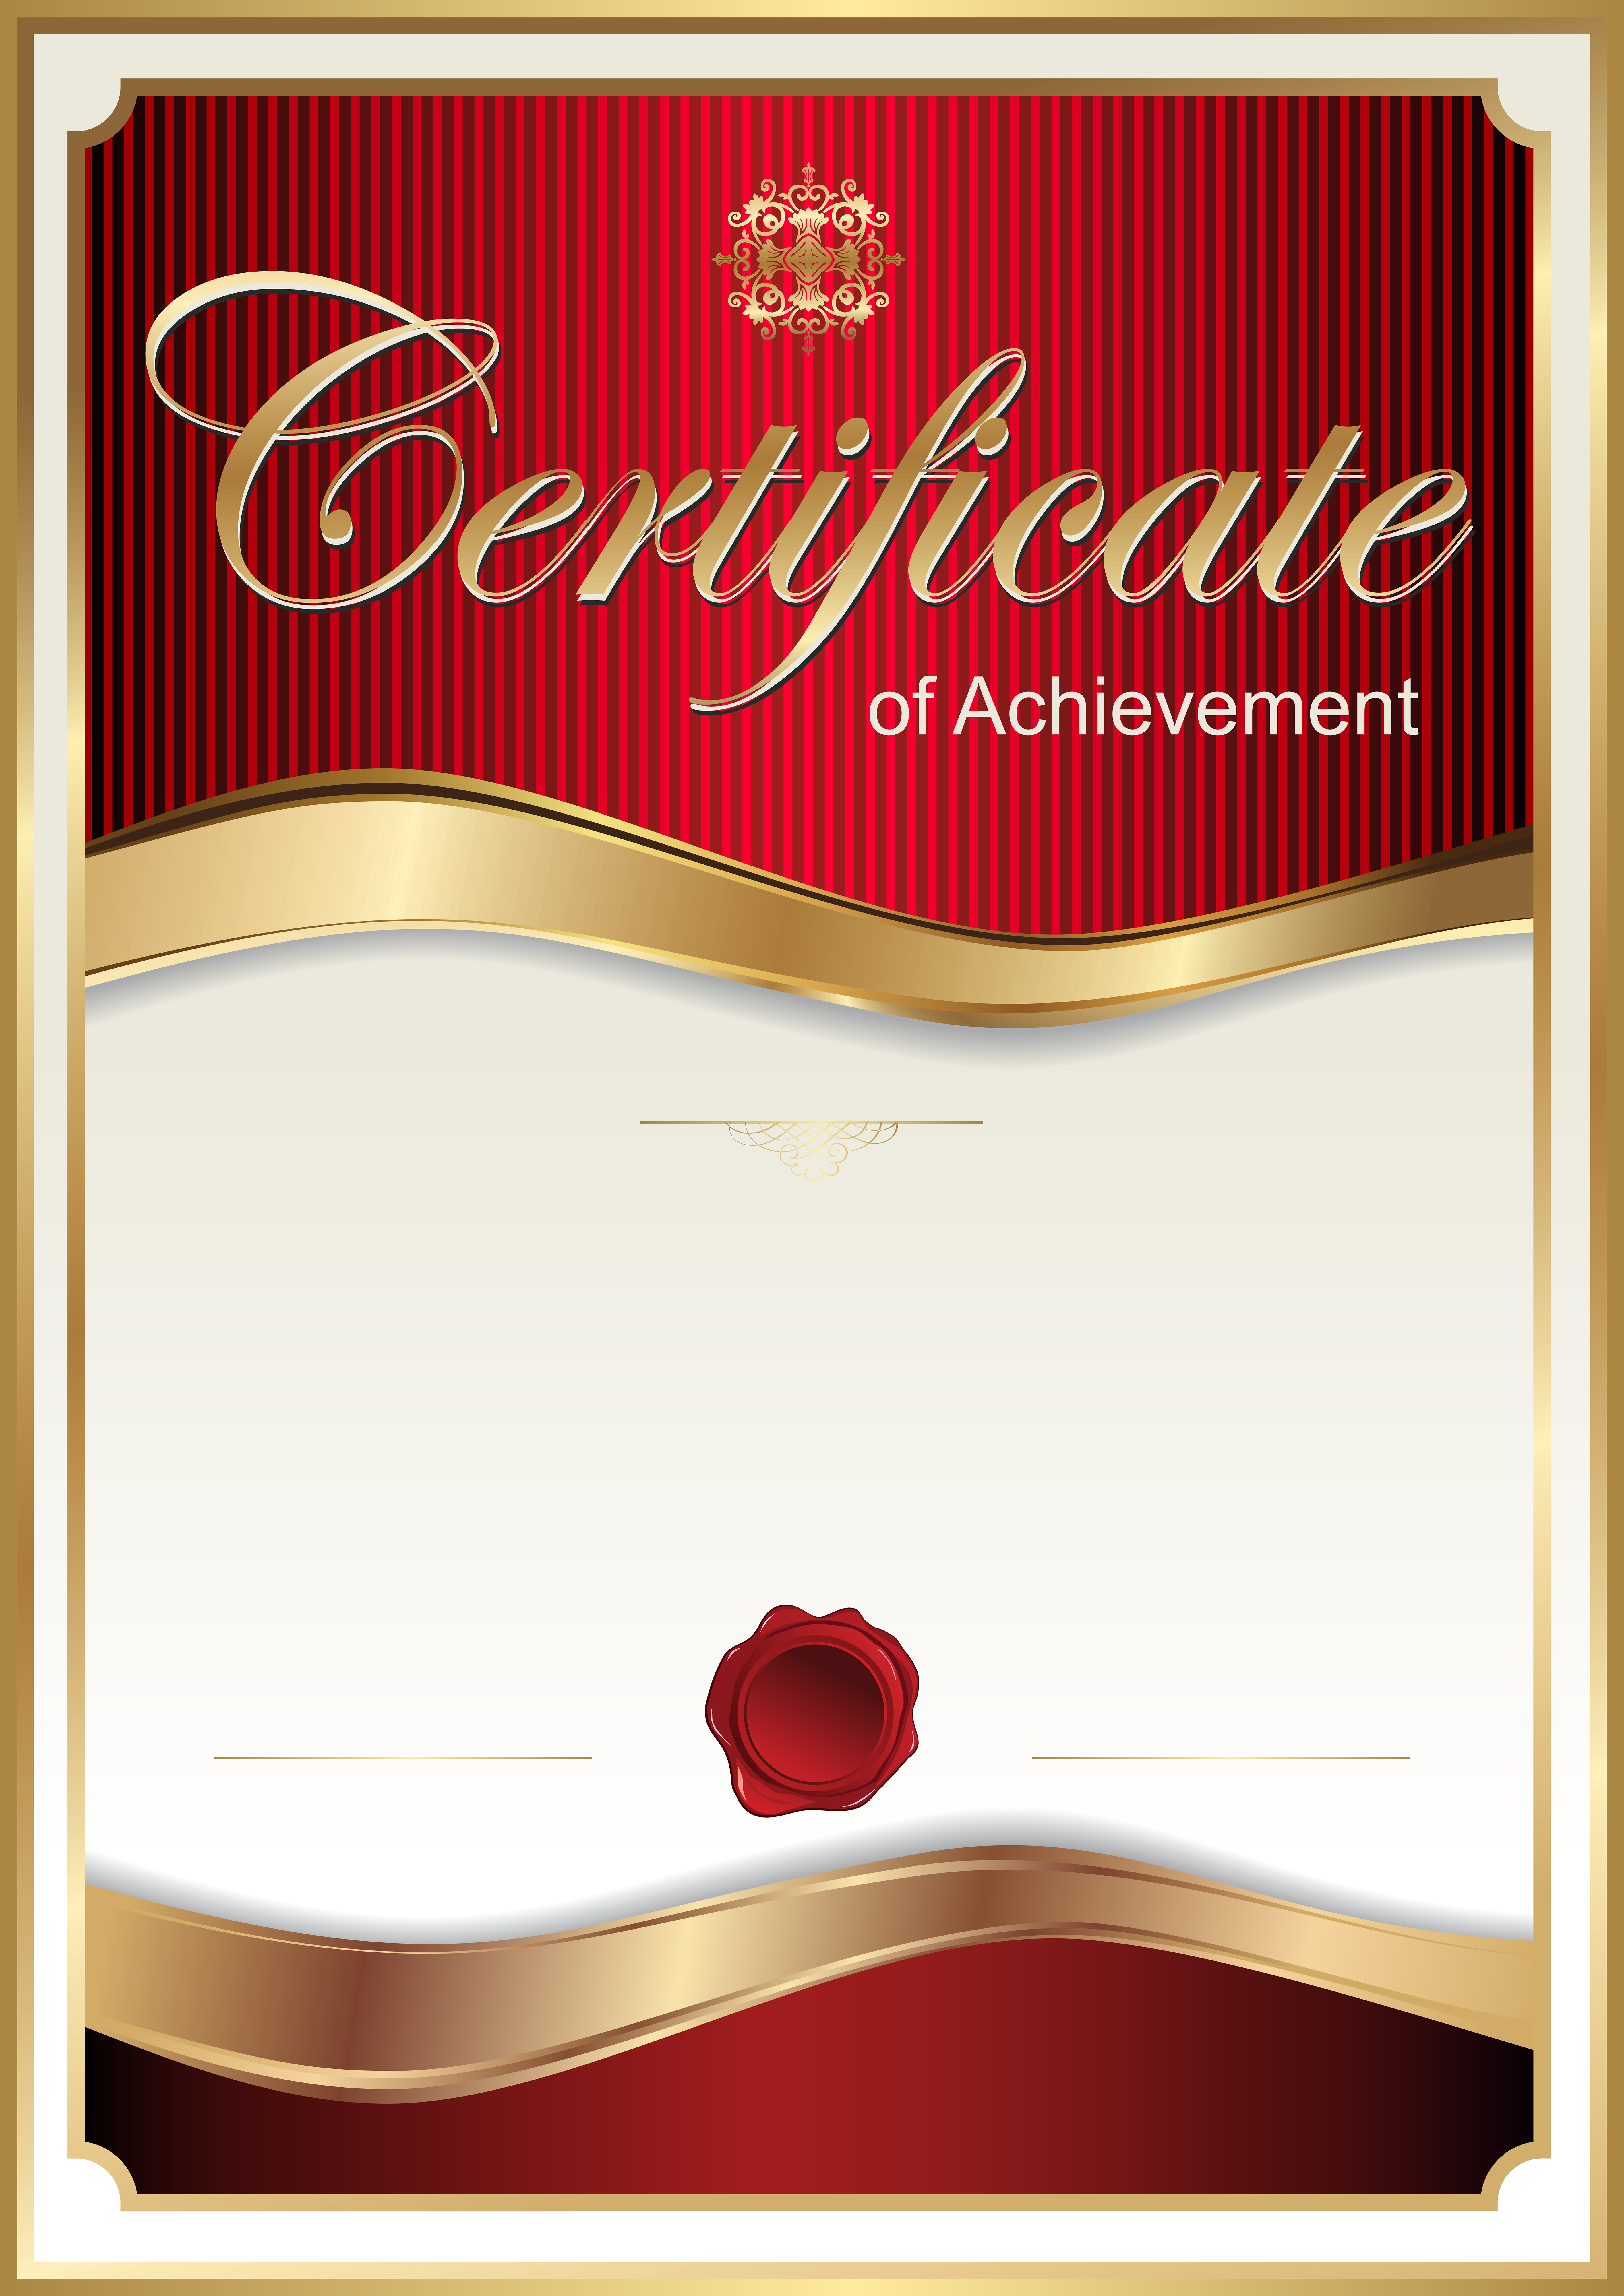 Certificate PNG Clipart